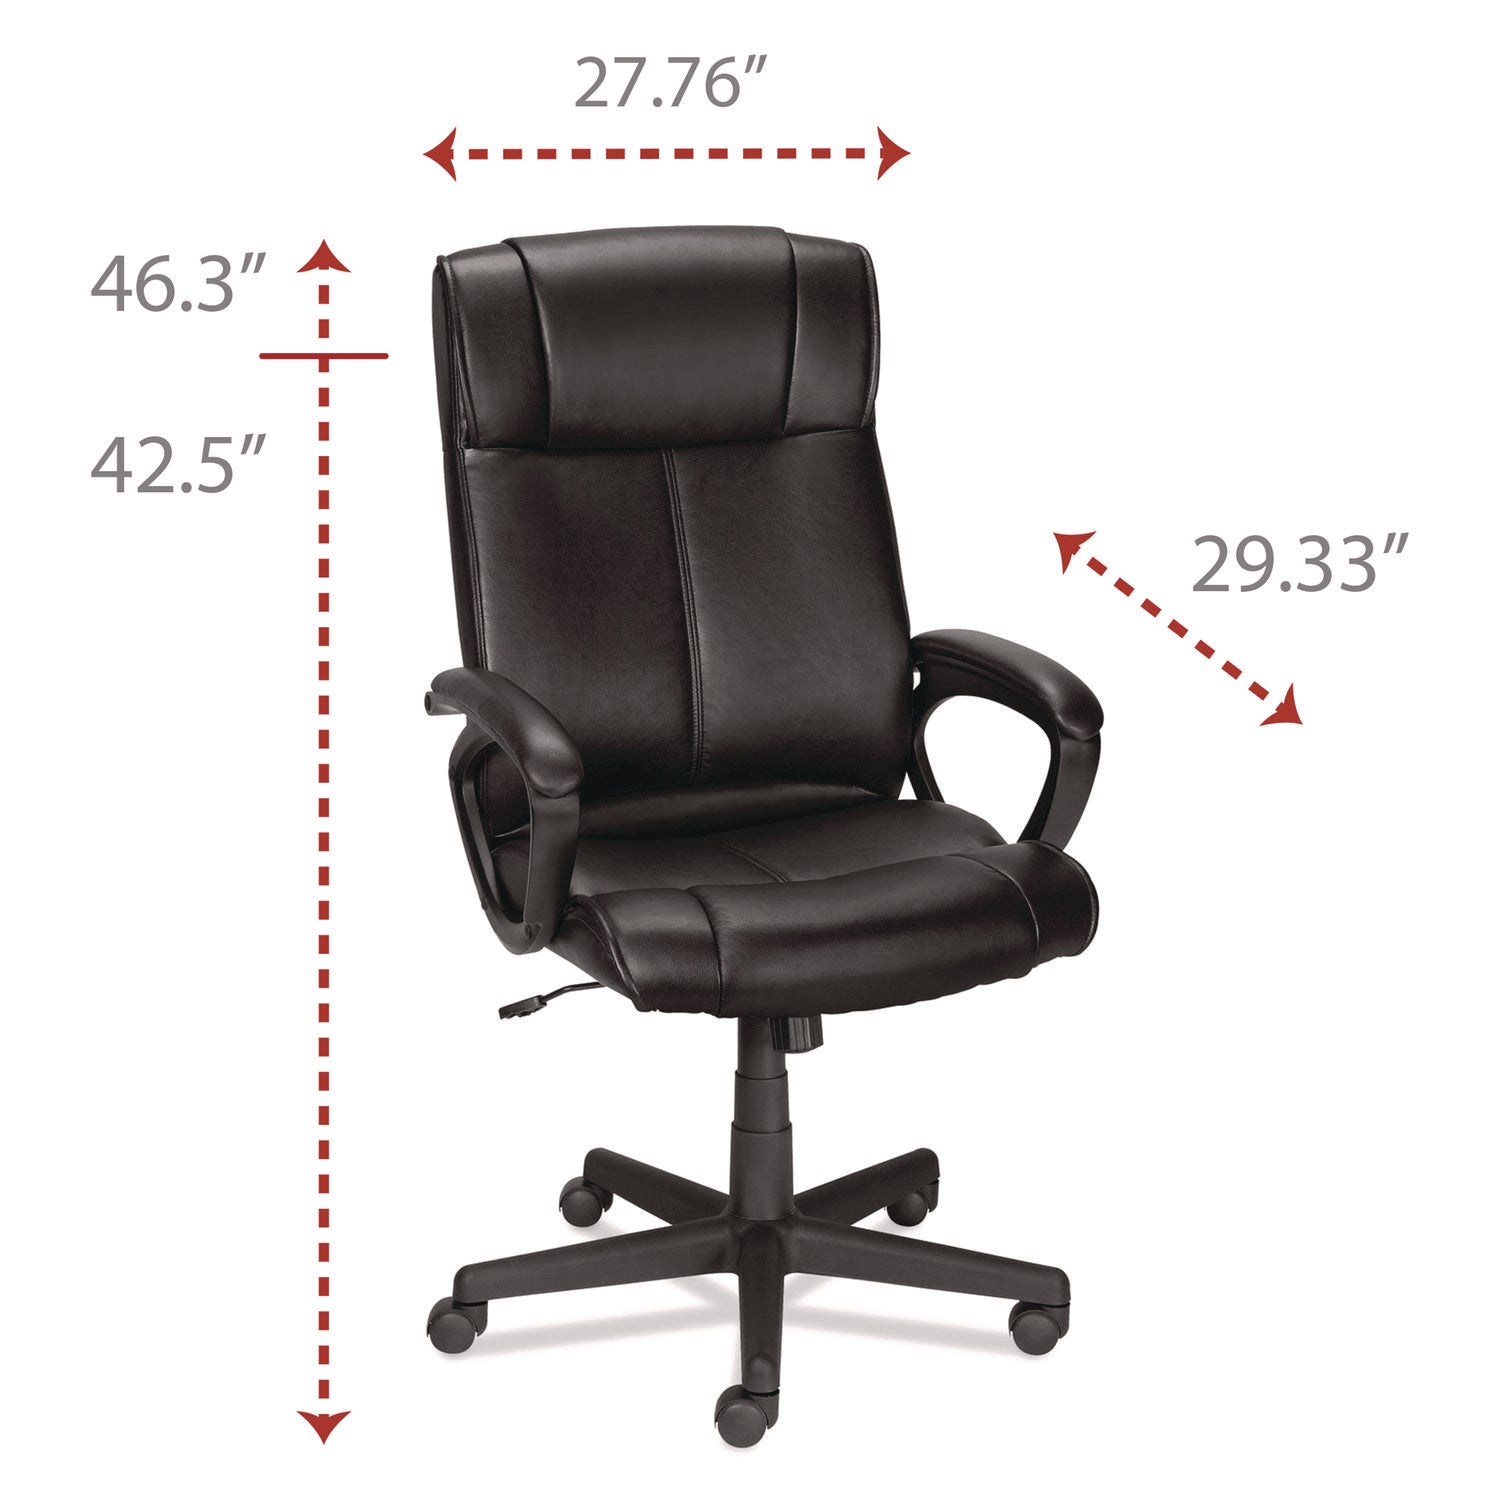 Alera Dalibor Series Manager Chair, Supports Up to 250 lb, 17.5" to 21.3" Seat Height, Black Seat/Back, Black Base - 7